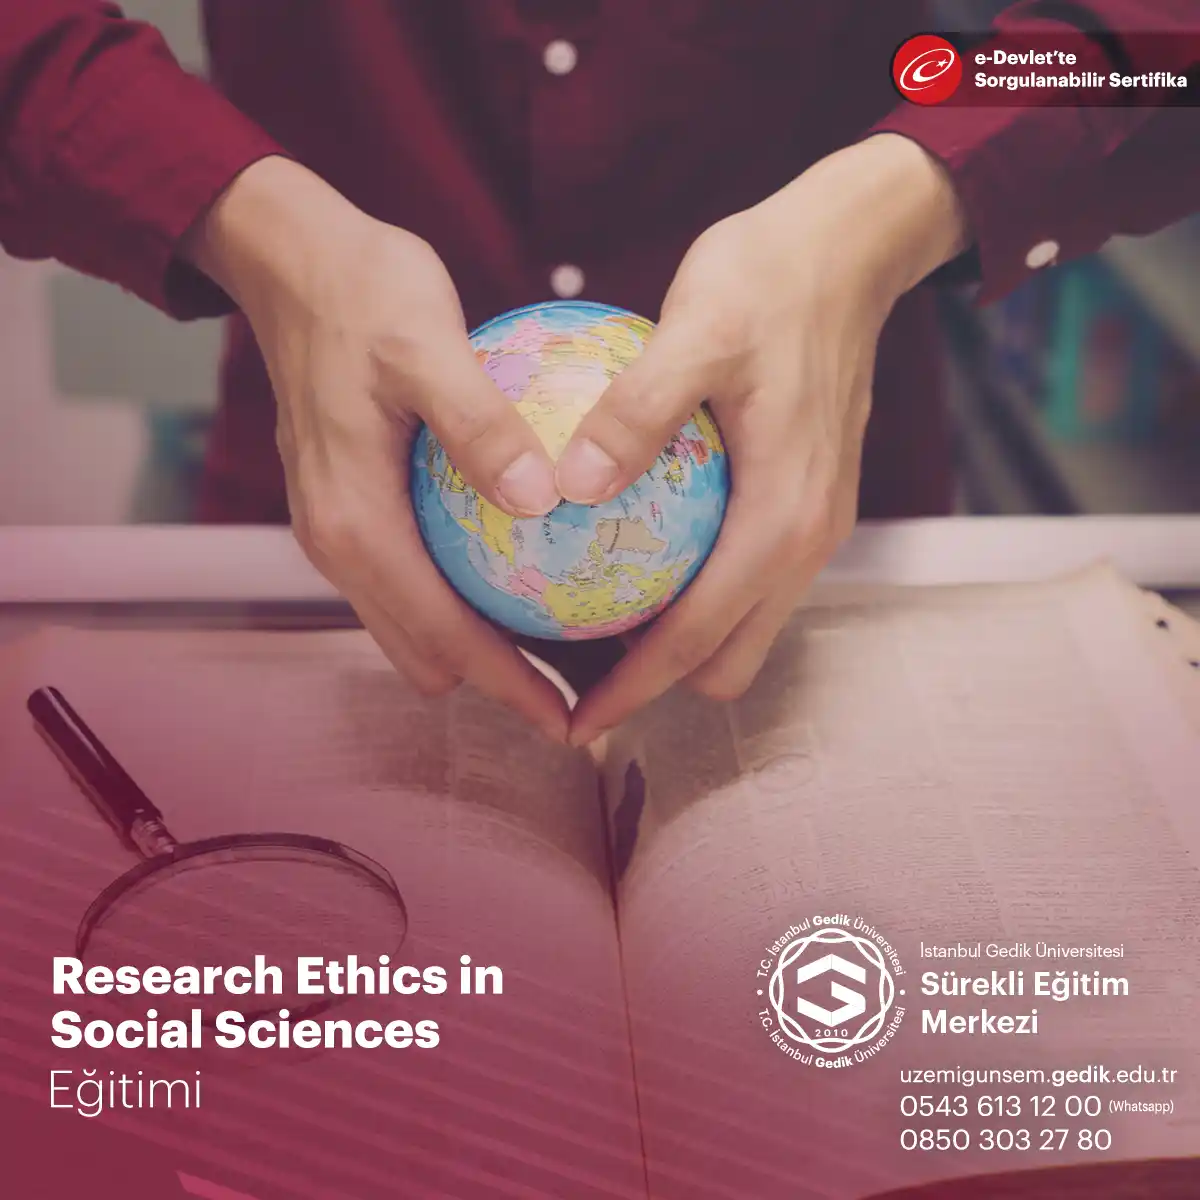 Research Ethics in Social Sciences